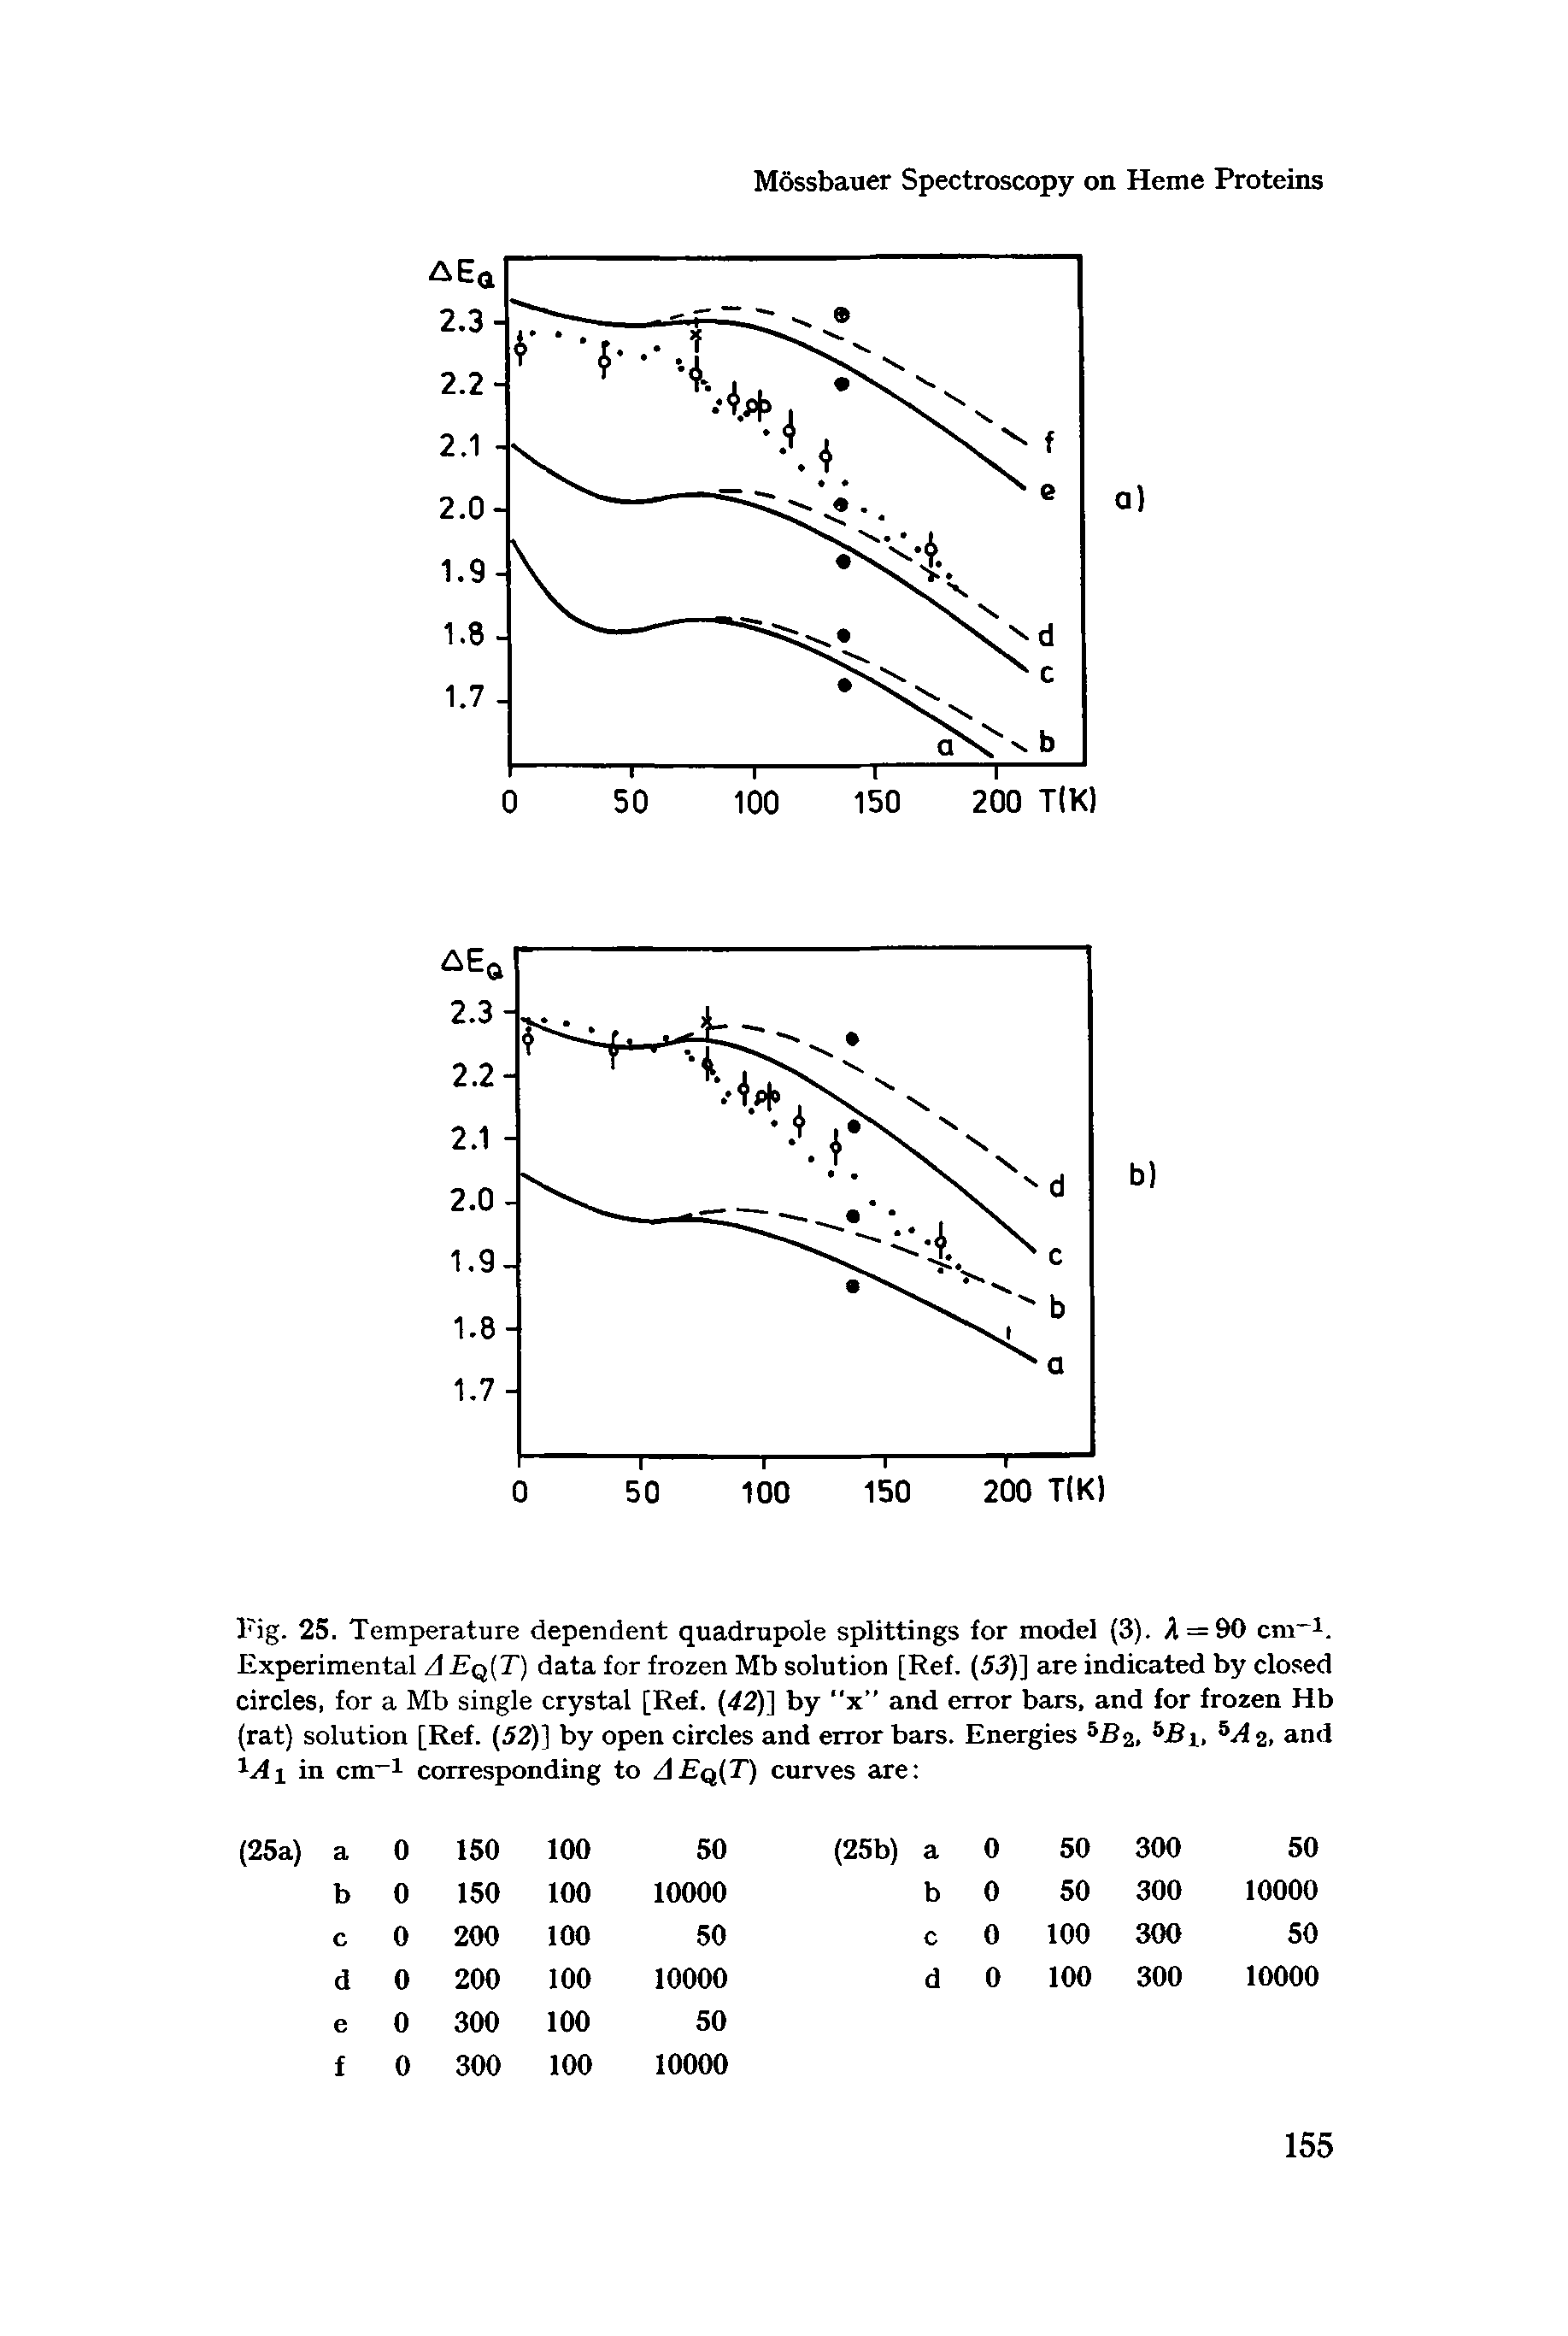 Fig. 25. Temperature dependent quadrupole splittings for model (3). A = 90 cm-1. Experimental A Eq(T) data for frozen Mb solution [Ref. (53)] are indicated by closed circles, for a Mb single crystal [Ref. (42)] by "x and error bars, and for frozen Hb (rat) solution [Ref. (52)] by open circles and error bars. Energies 5B%, bB ], bA 2, and Mi in cm-1 corresponding to AEq(T) curves are ...